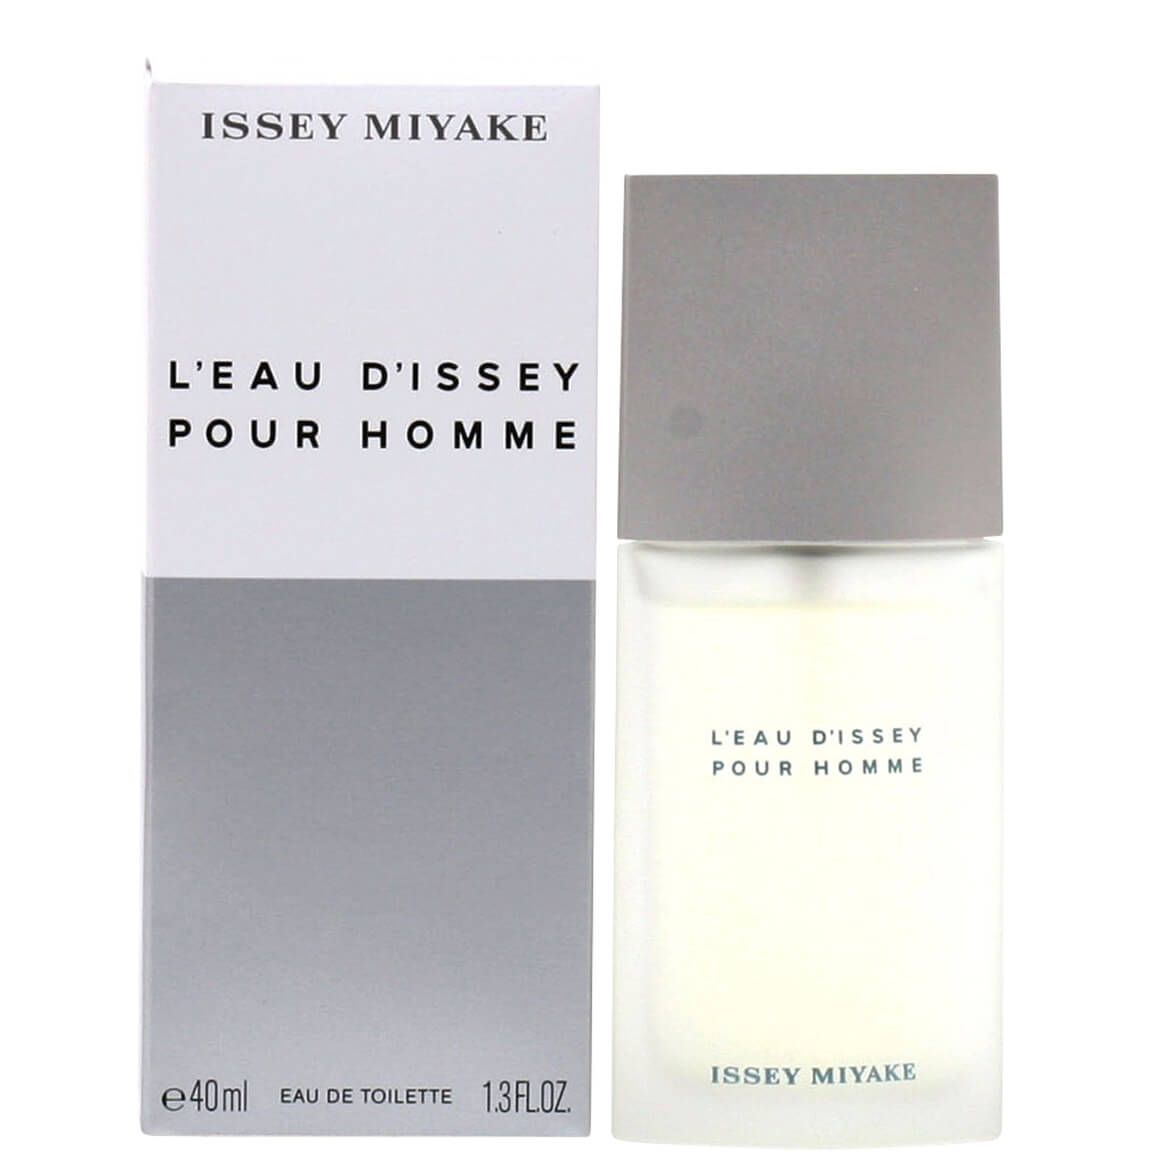 _eau _issey Pour Homme by Issey Miyake for Men EDT, 1.3 oz.. + '-' + 373163